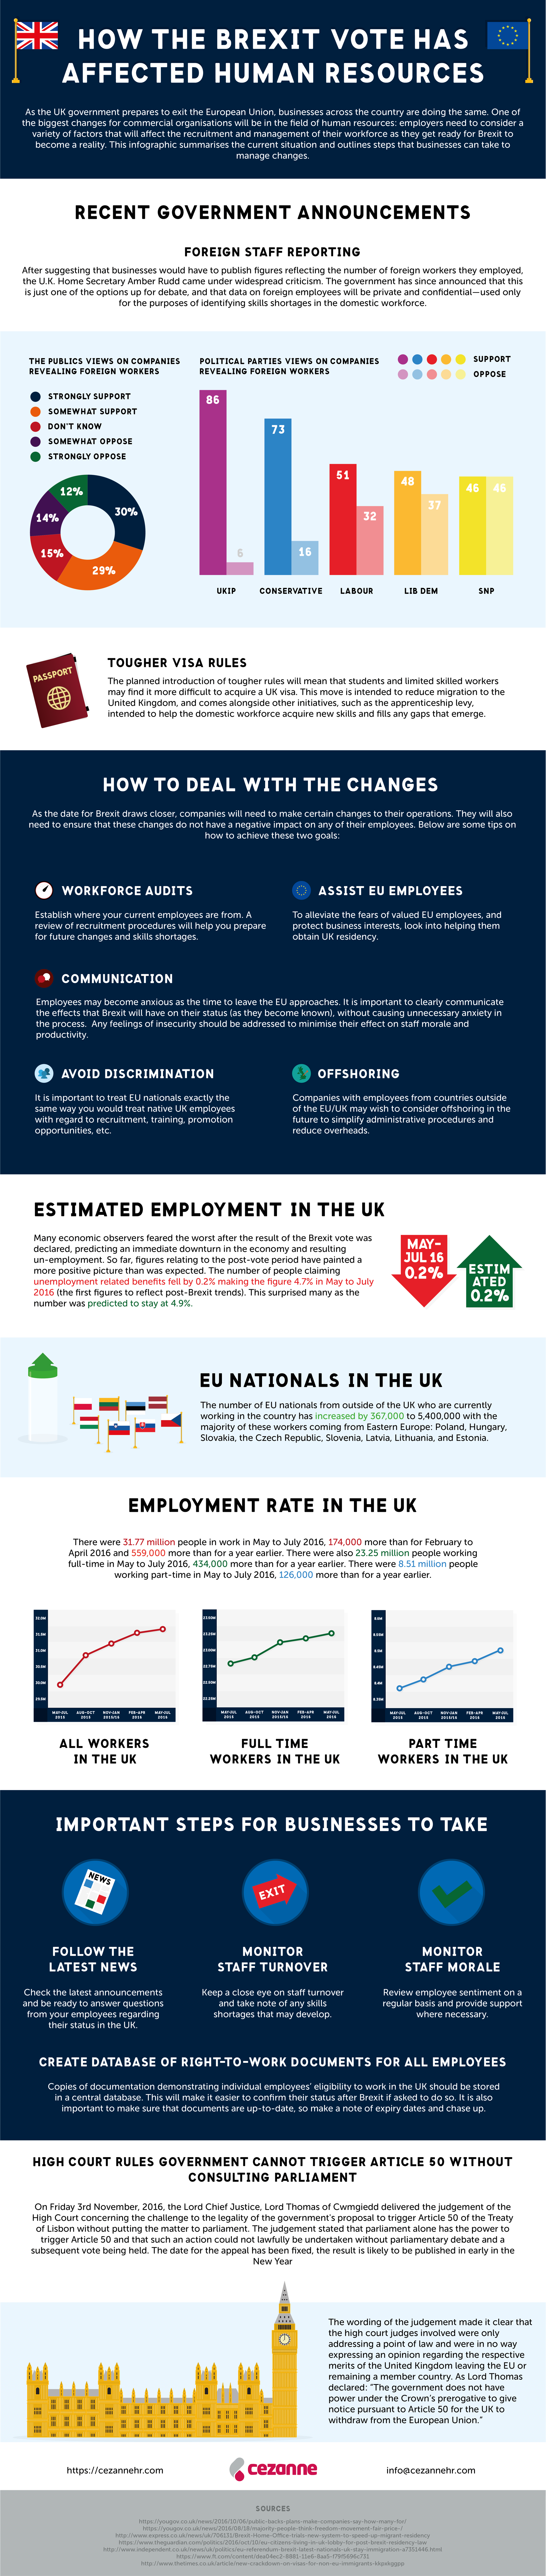 How the Brexit vote has affected human resources